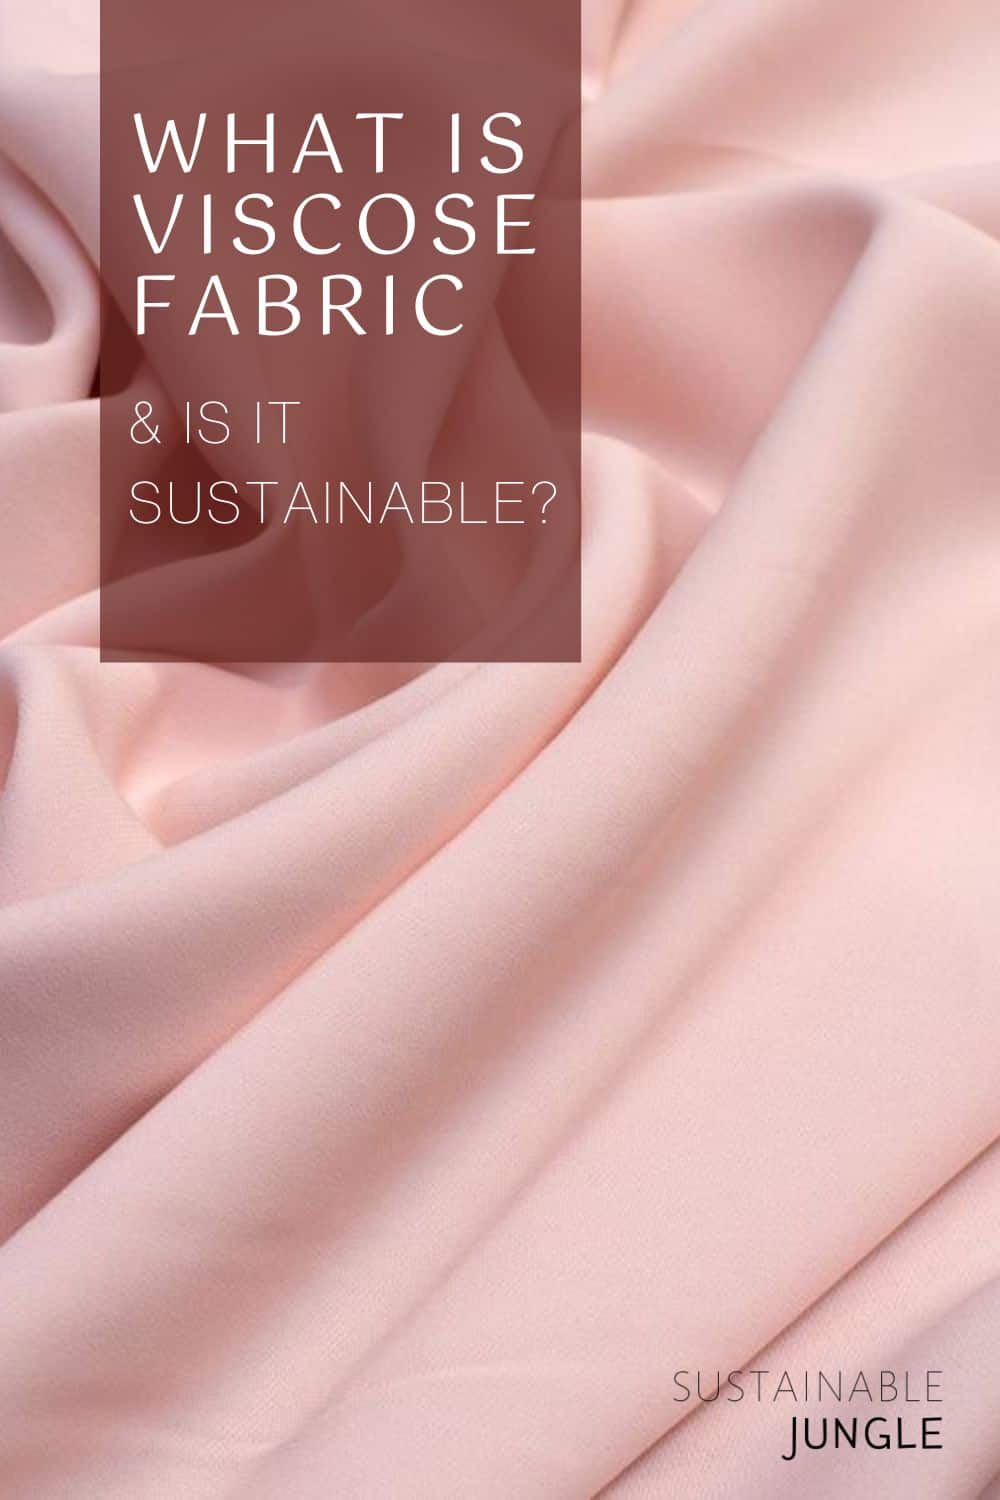 What Is Viscose Fabric & Is It Sustainable? Image by Dmitri Kalvan via Getty Images on Canva Pro #viscosefabric #whatisviscosefabric #isviscosesustainable #viscosesustainability #isviscoseecofriendly #viscosfabricprosandcons #sustainablejungle